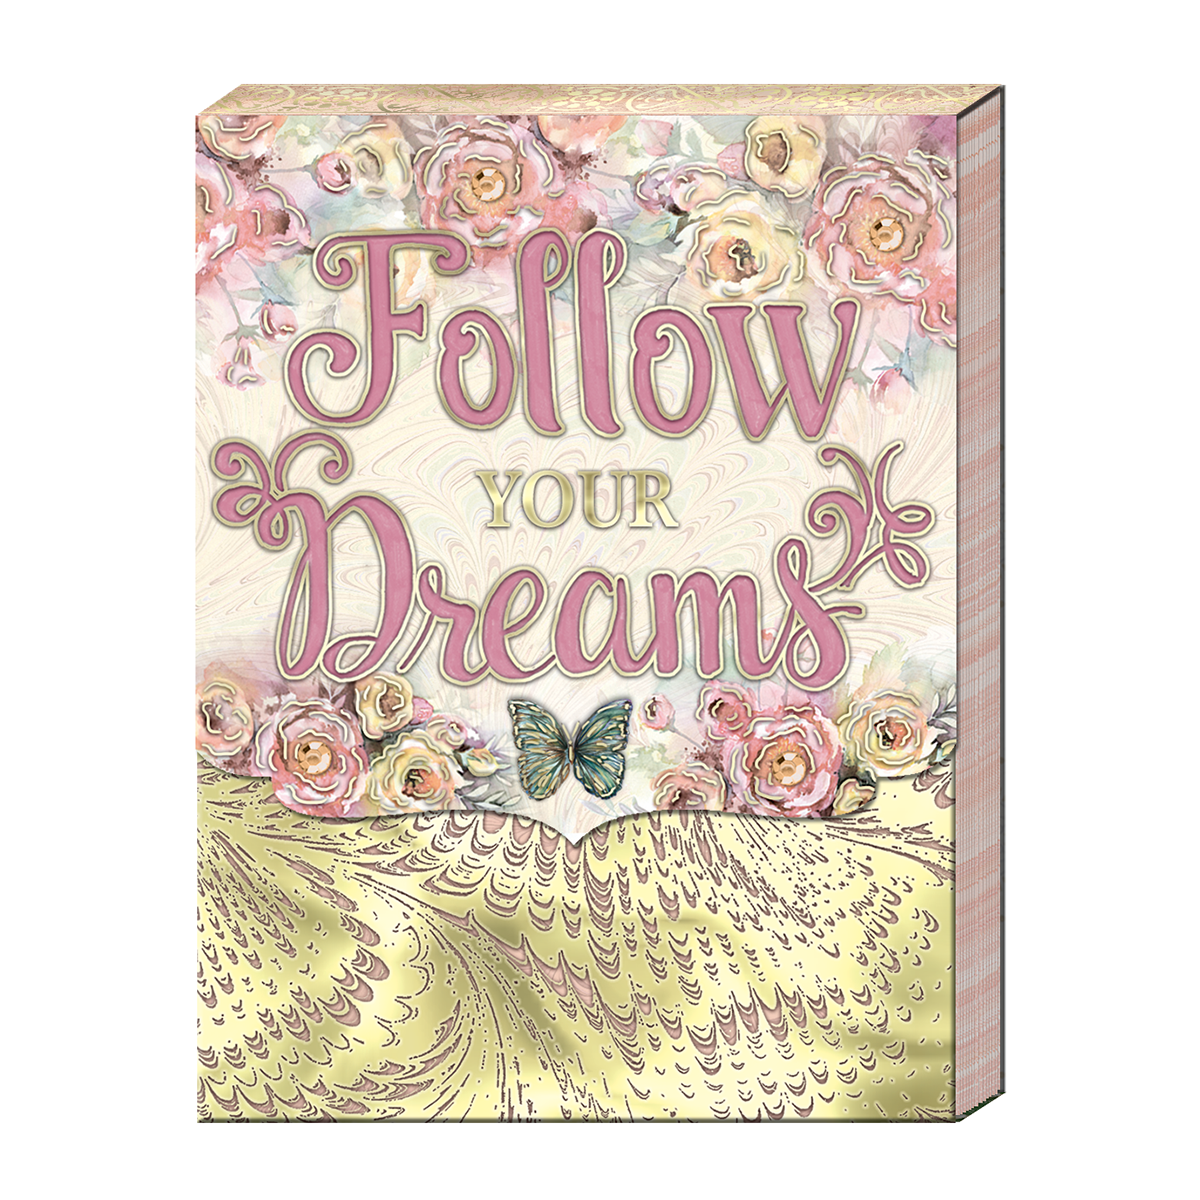 Follow Your Dreams Pocket Notepad Product